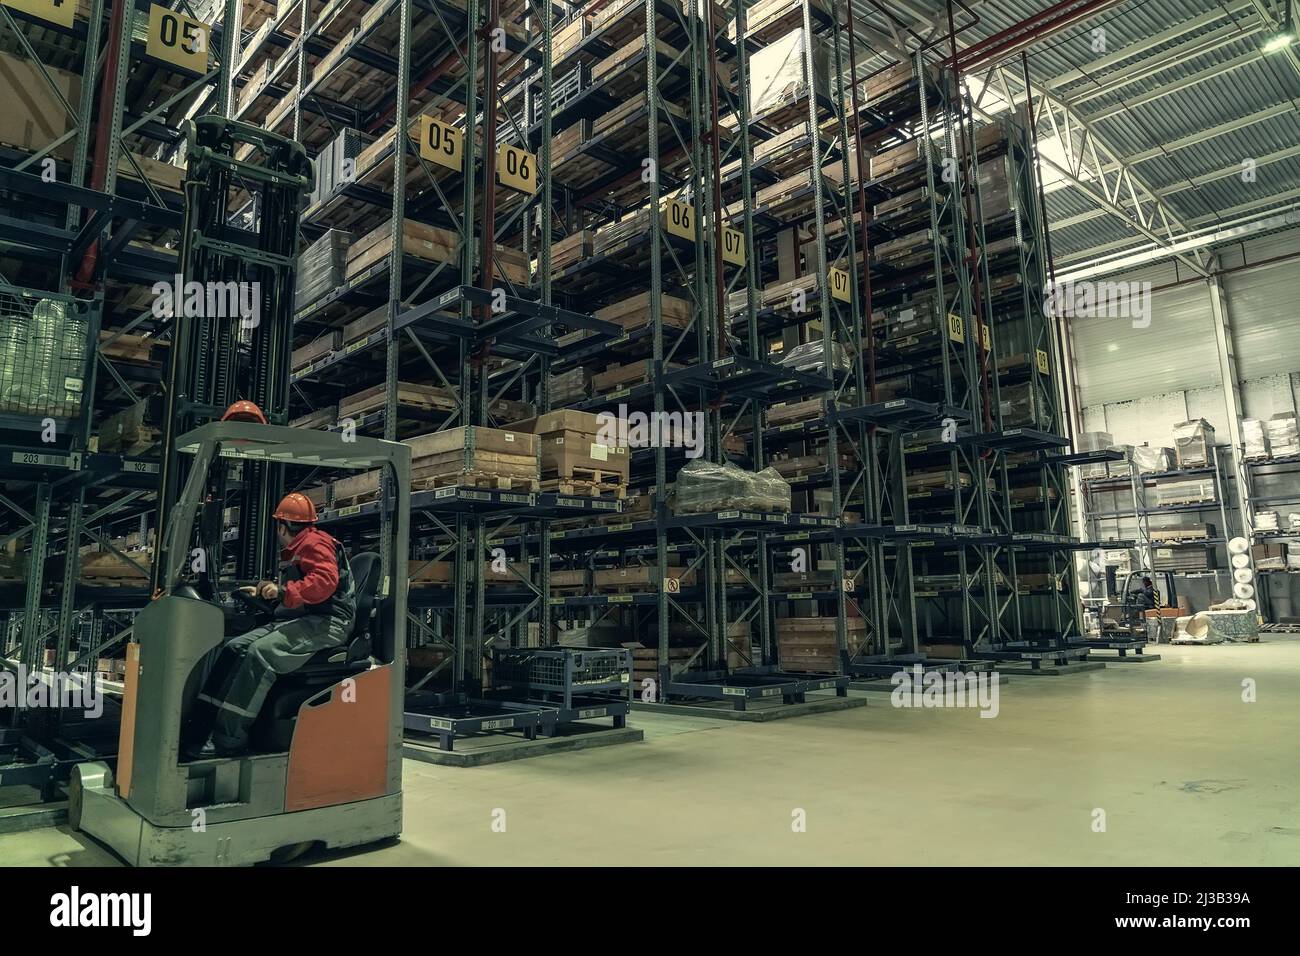 Warehouse of logistic company with forklifts. Large distribution storehouse with high shelves. Stock Photo